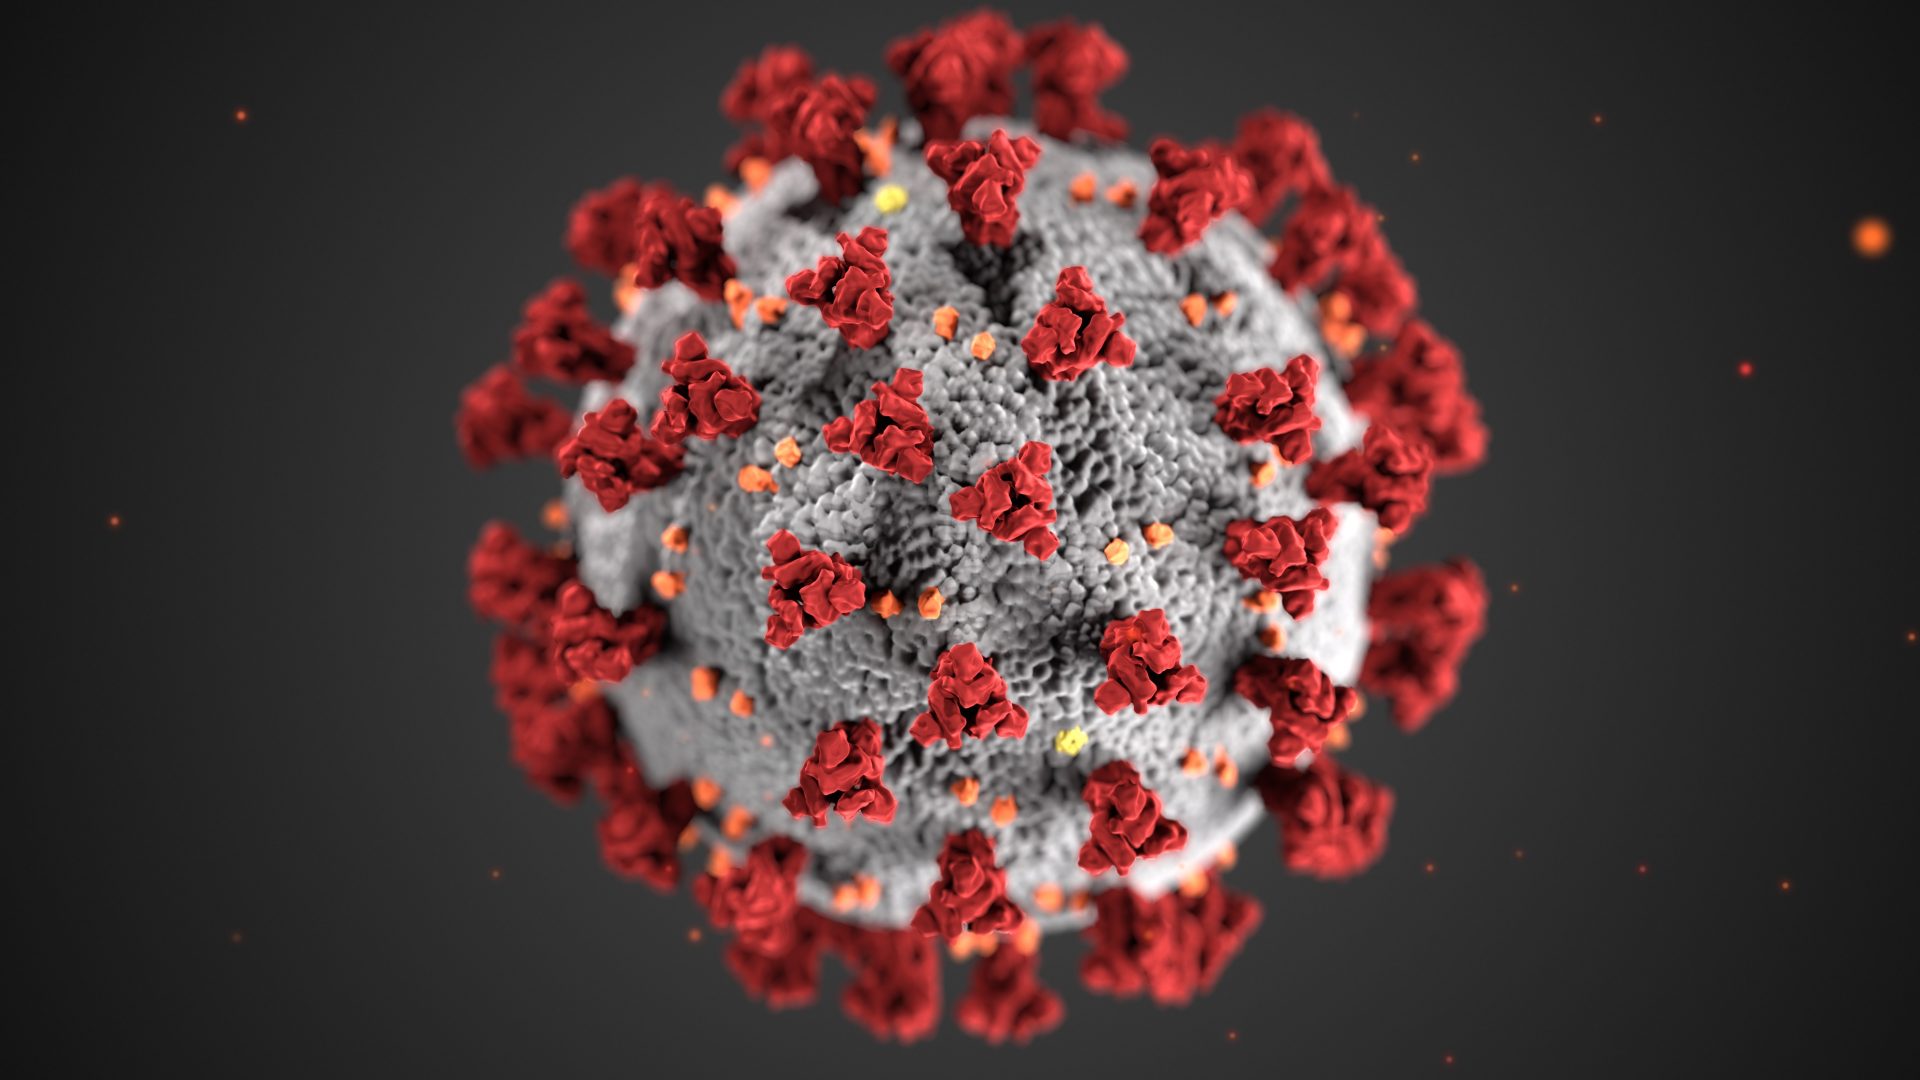 A coronavirus disease 2019 (COVID-19) particle is pictured in this illustration provided by the U.S. Centers for Disease Control and Prevention.